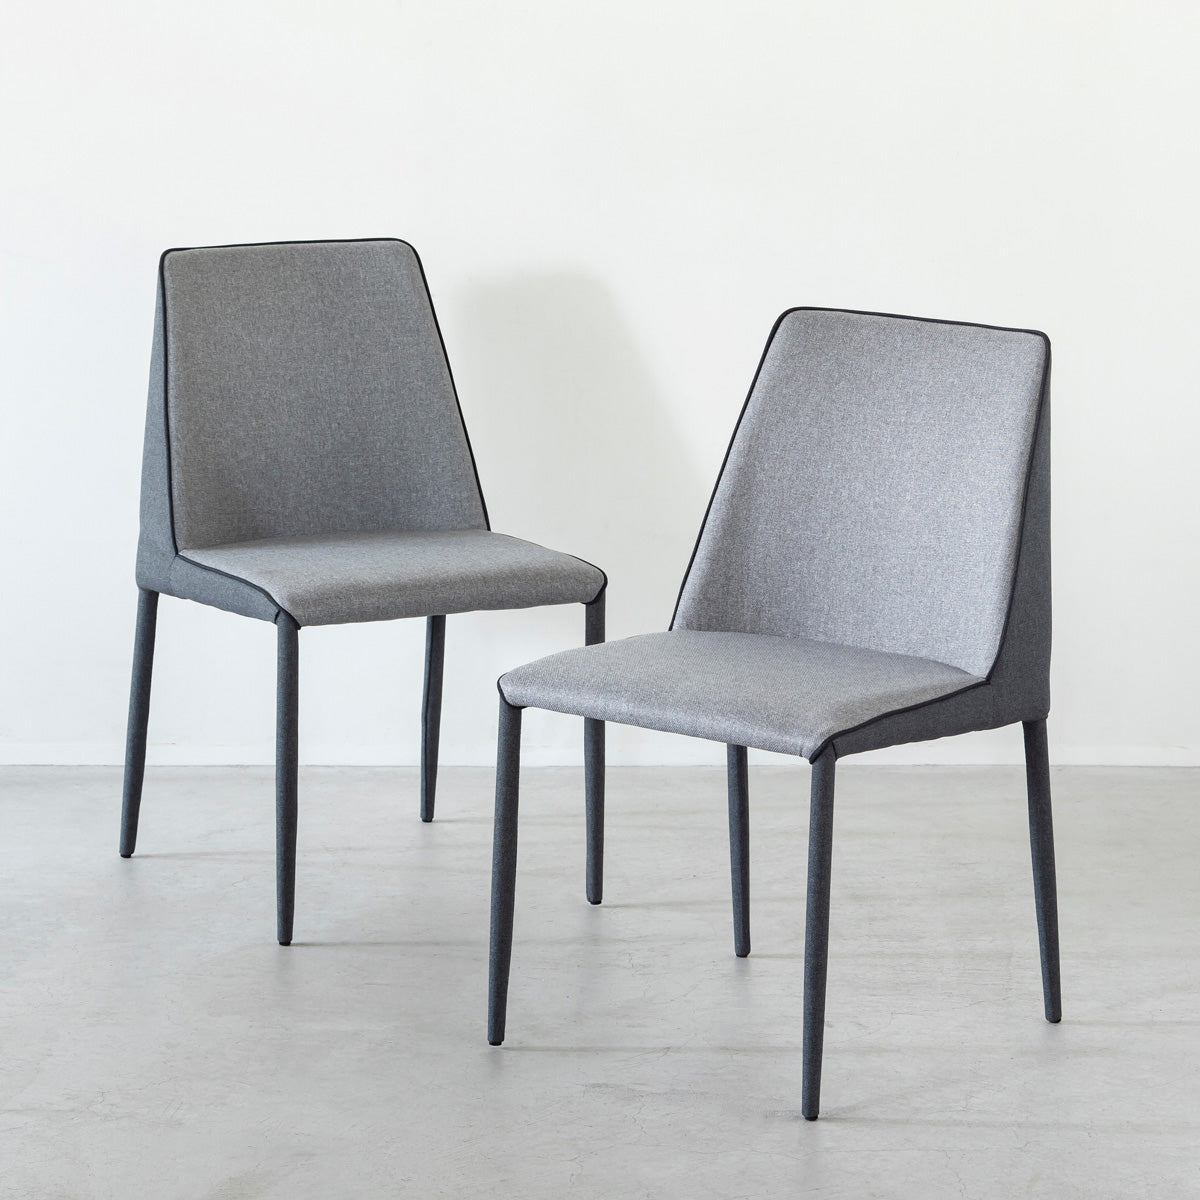 Two-tone Stylish Chair × 2